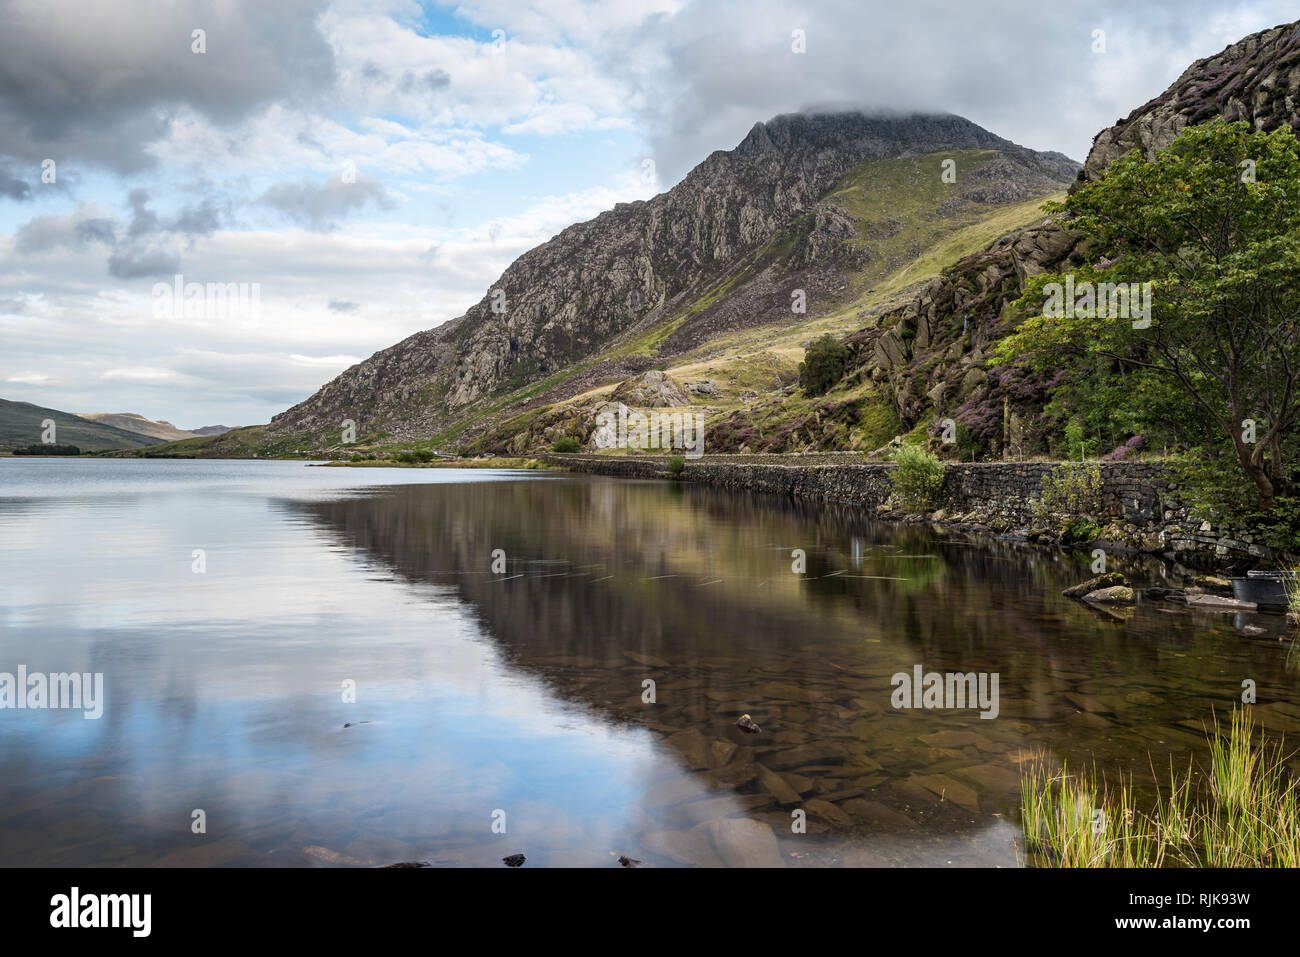 View of a lake in Snowdonia National Park, Gwynedd, Wales, UK Stock Photo